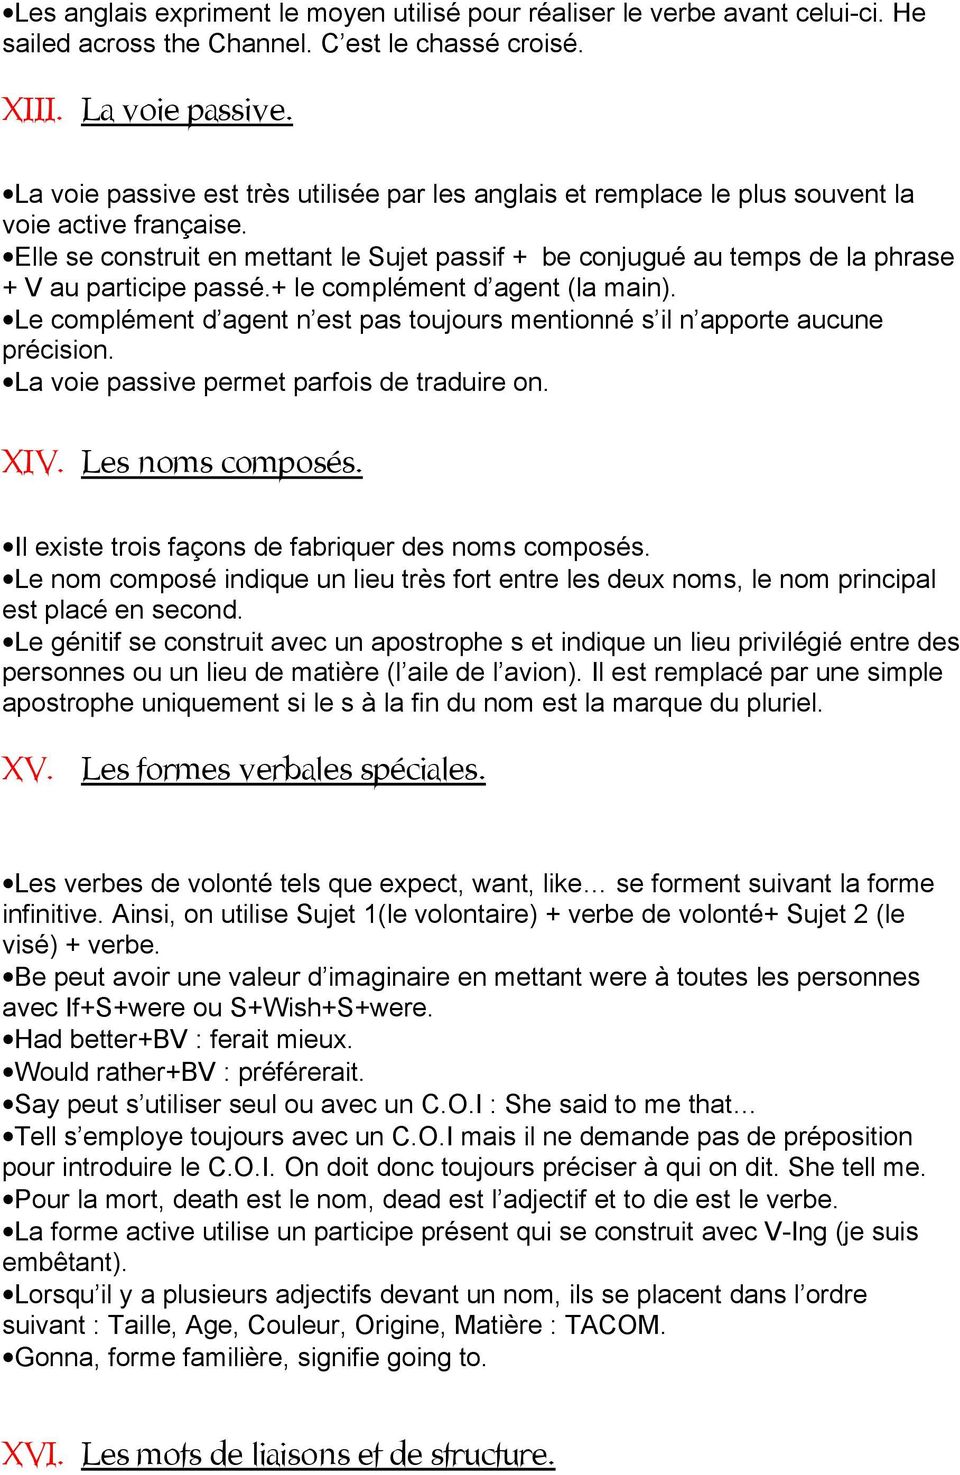 Fiches Recapitulatives D Anglais V Pdf Free Download